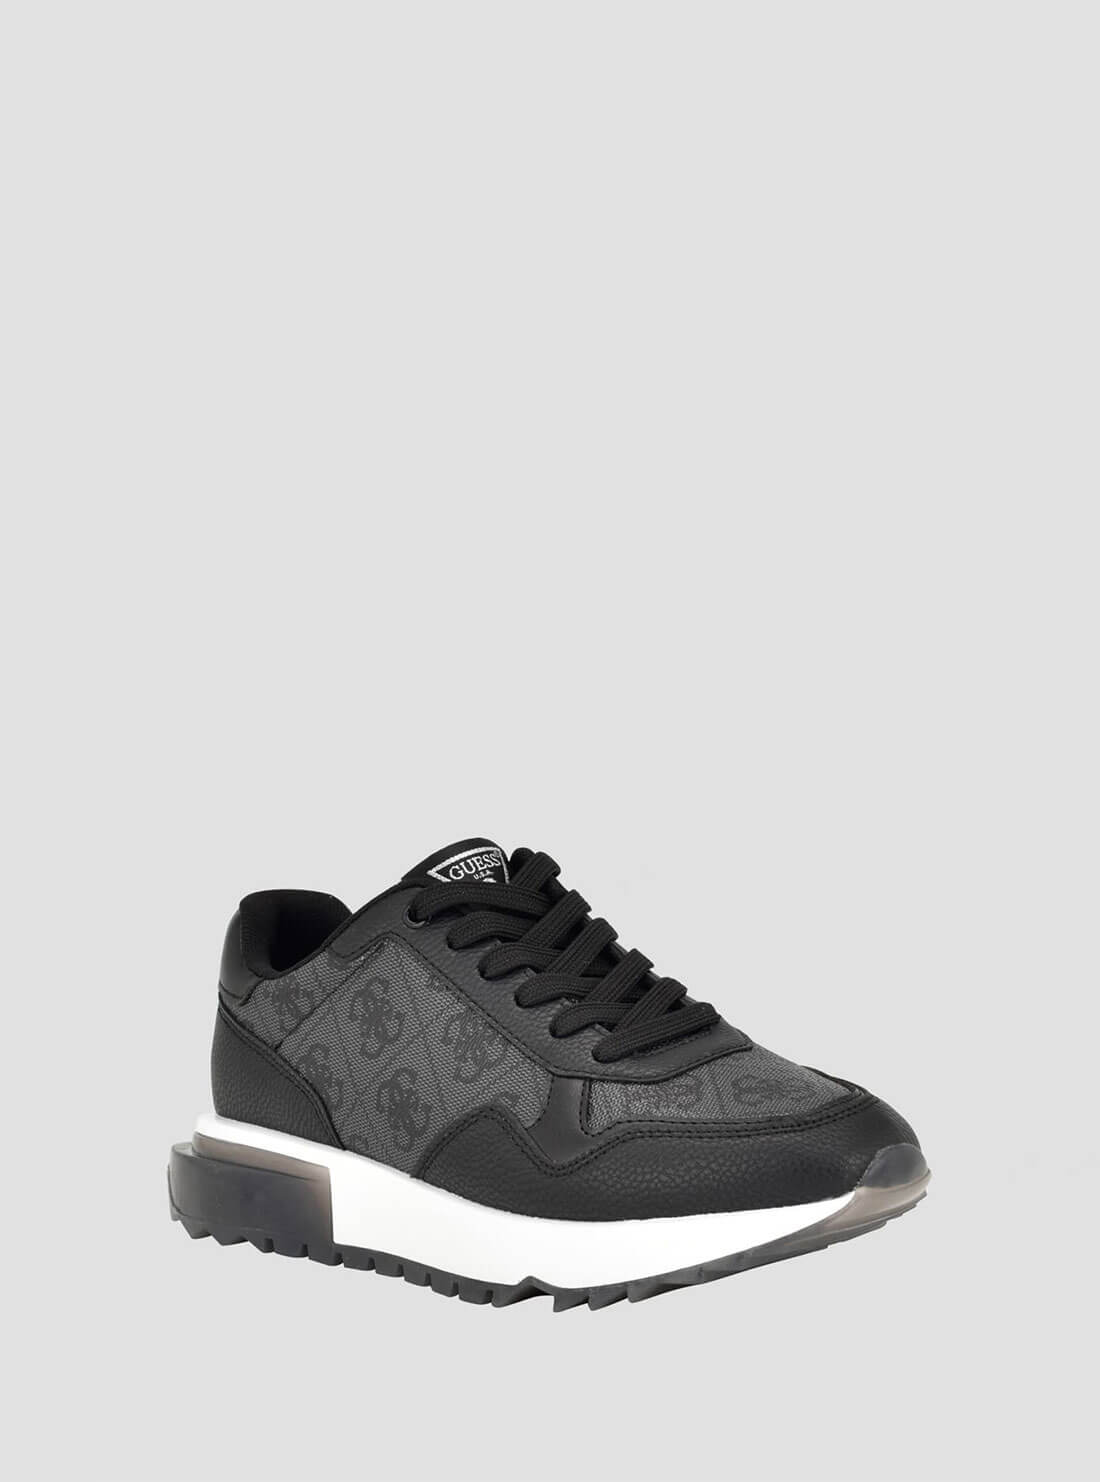 Black Melany Sneakers | GUESS Women's Shoes | Front view